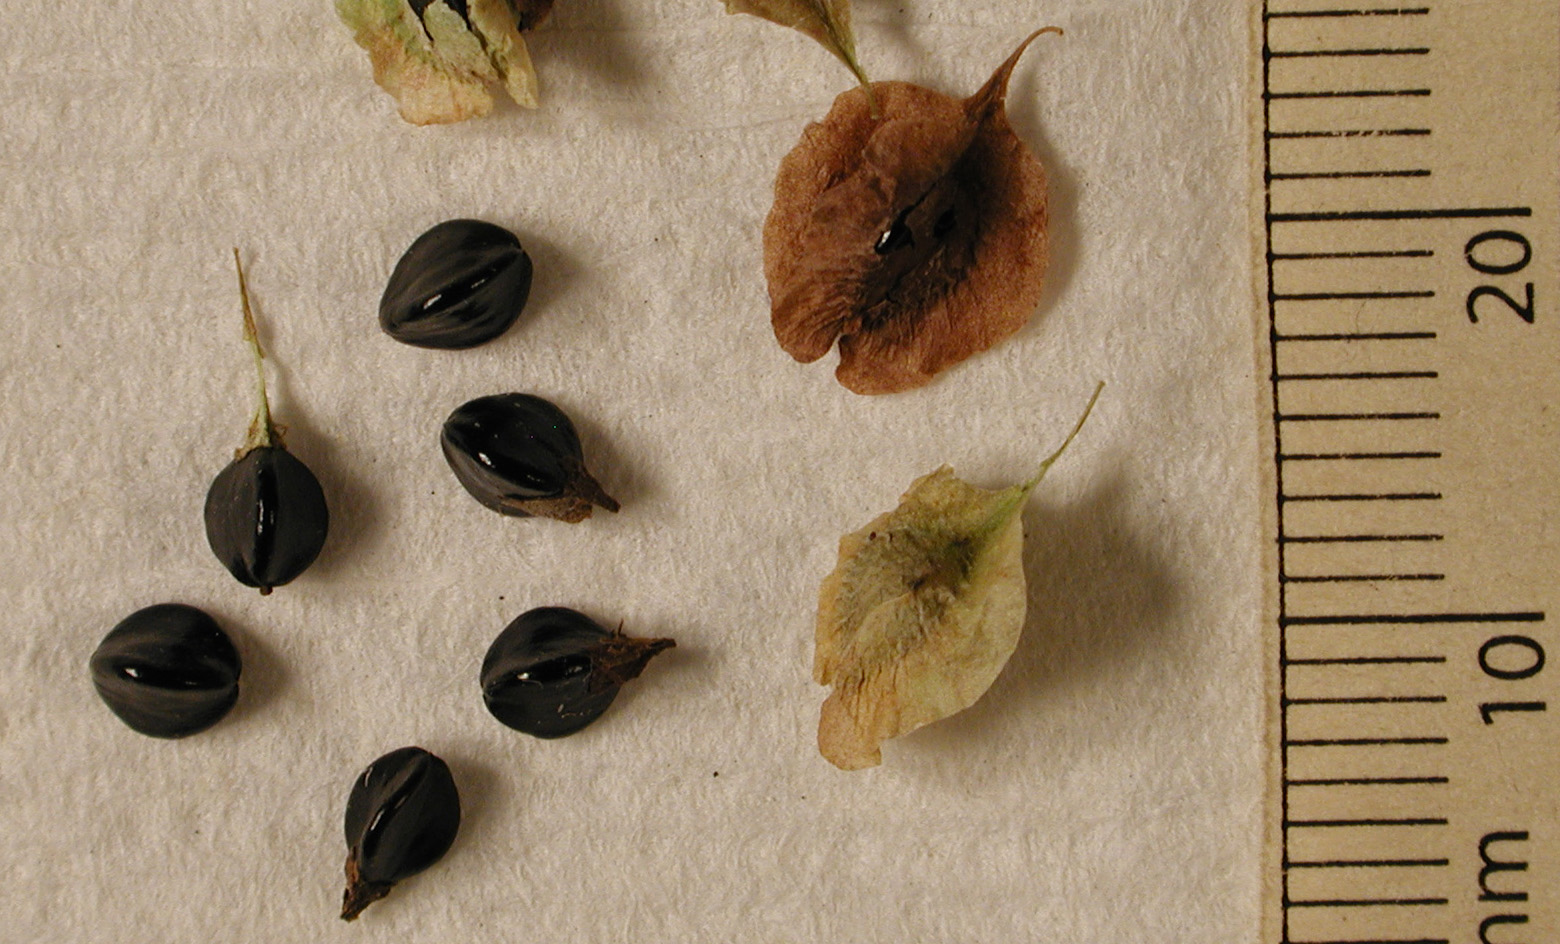 POLY Fall scan seeds